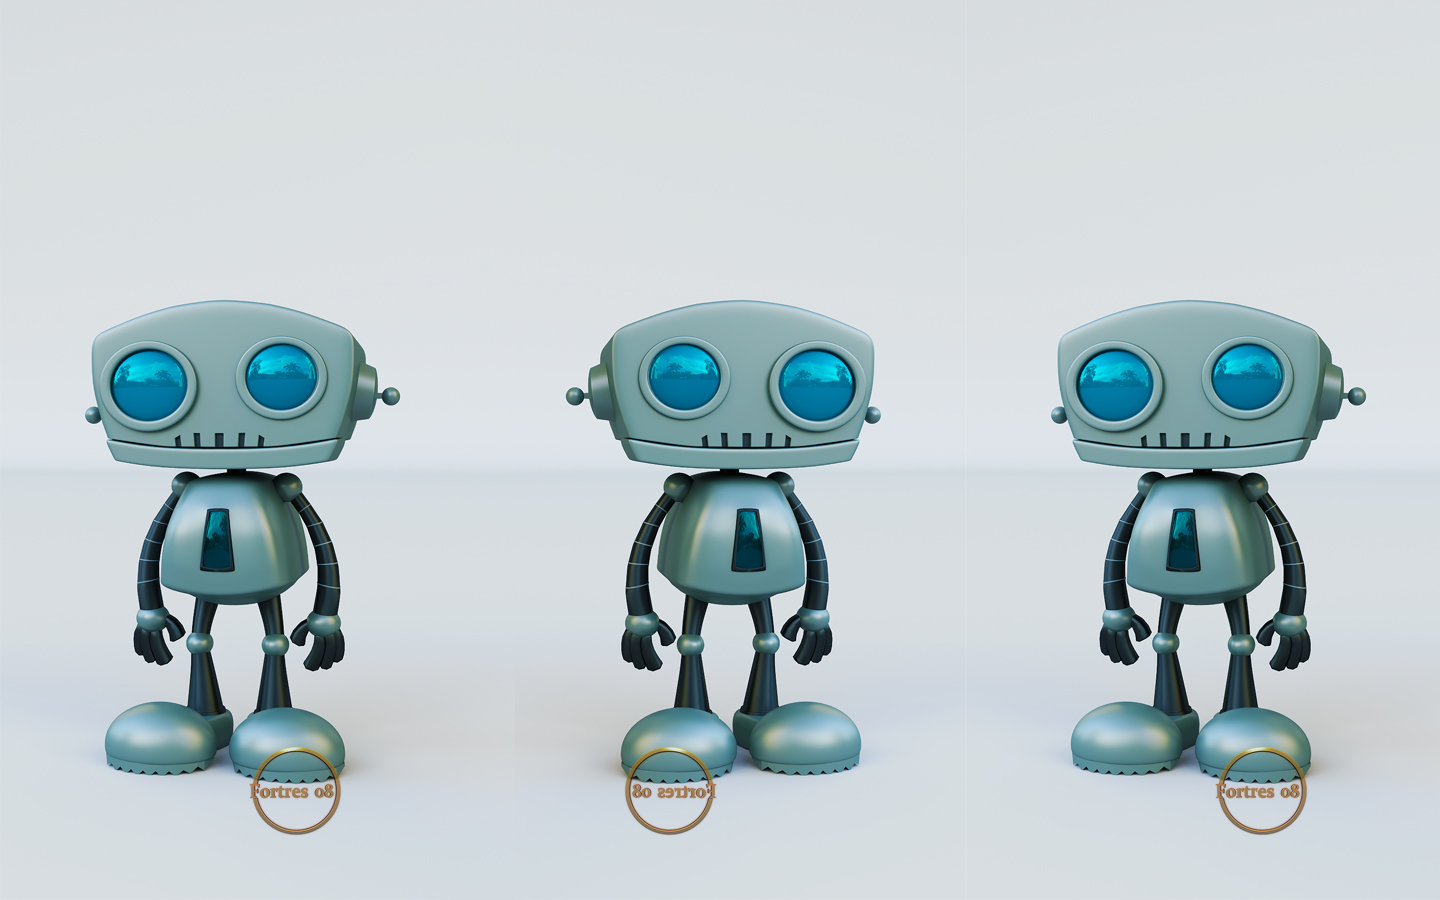 Cartoon Robot - Finished Projects - Blender Artists Community